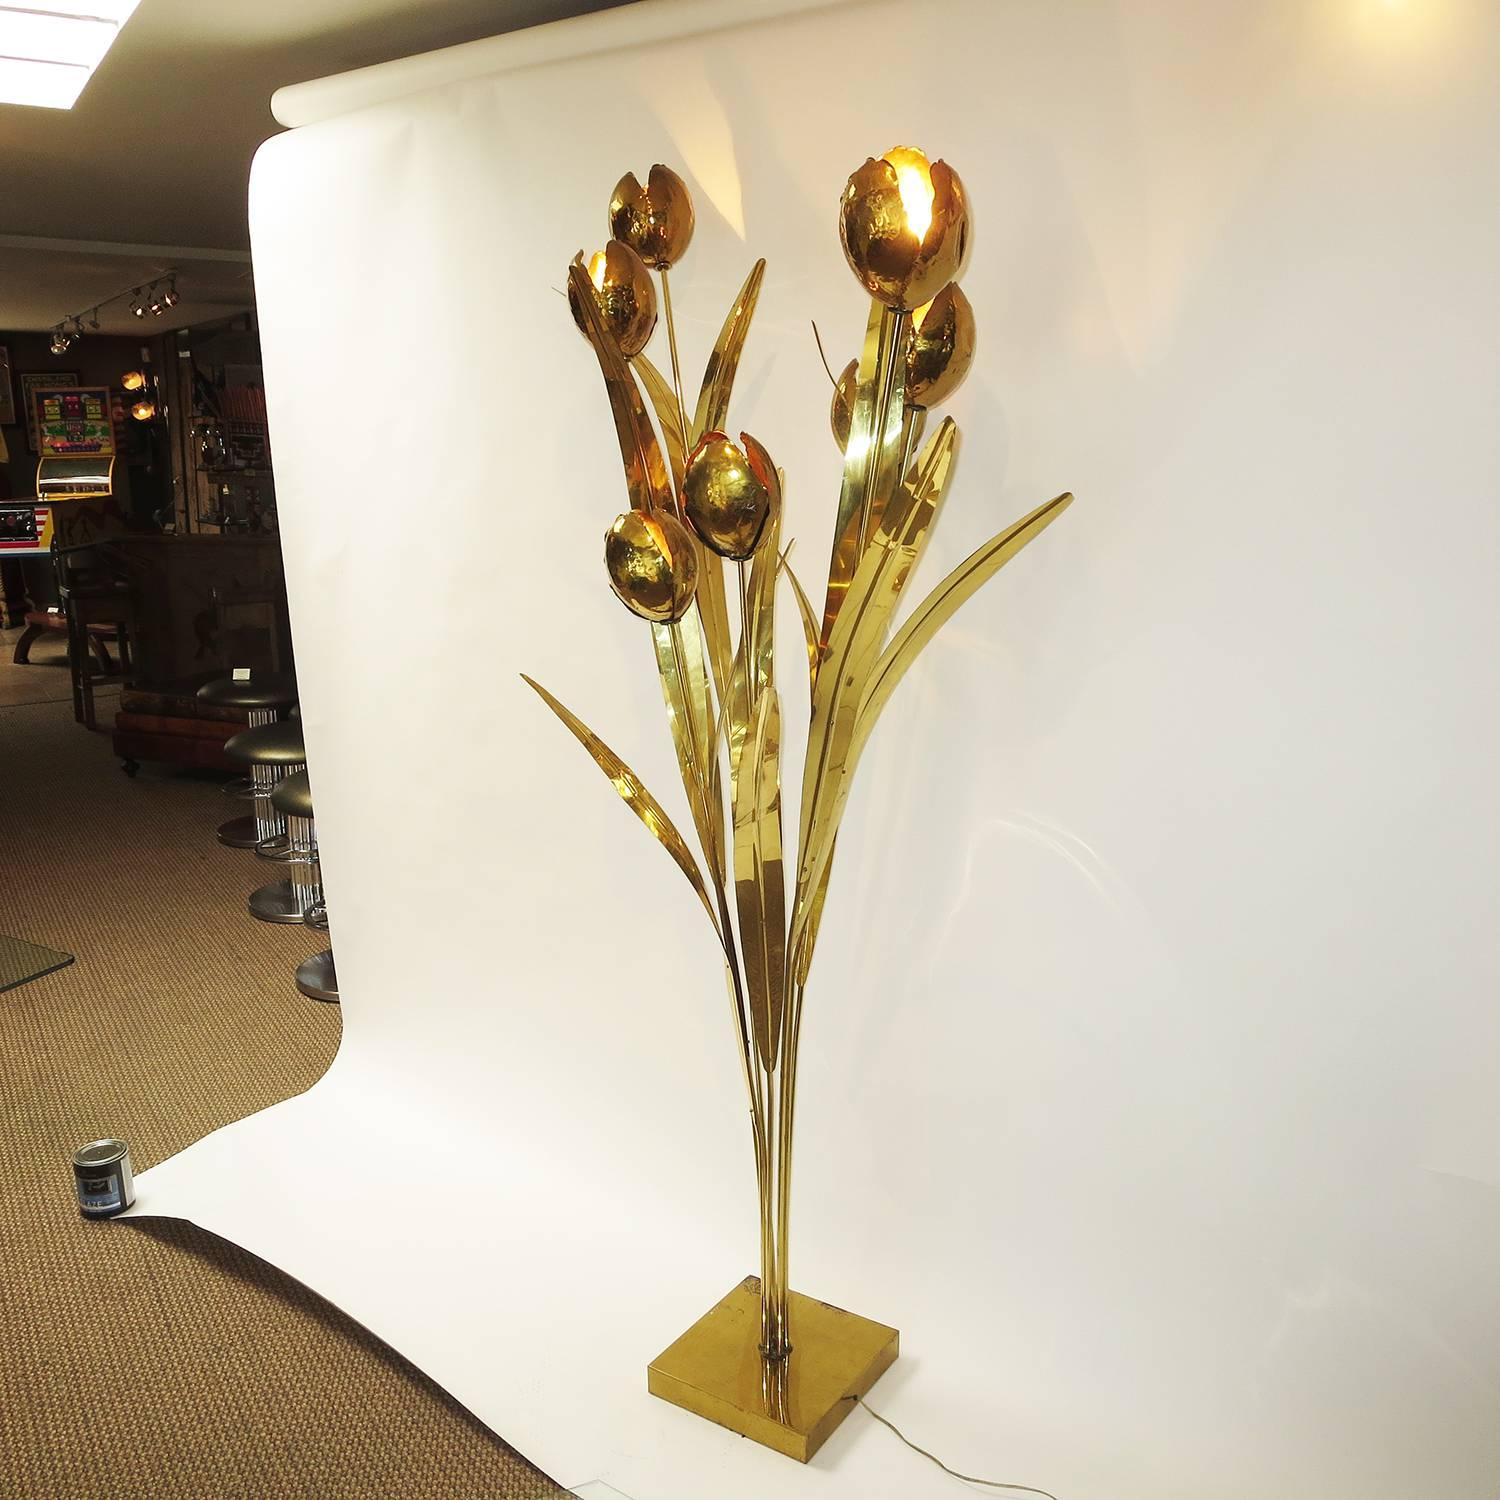 A lovely lamp featuring solid brass flowers and leaves radiating from seven brass 